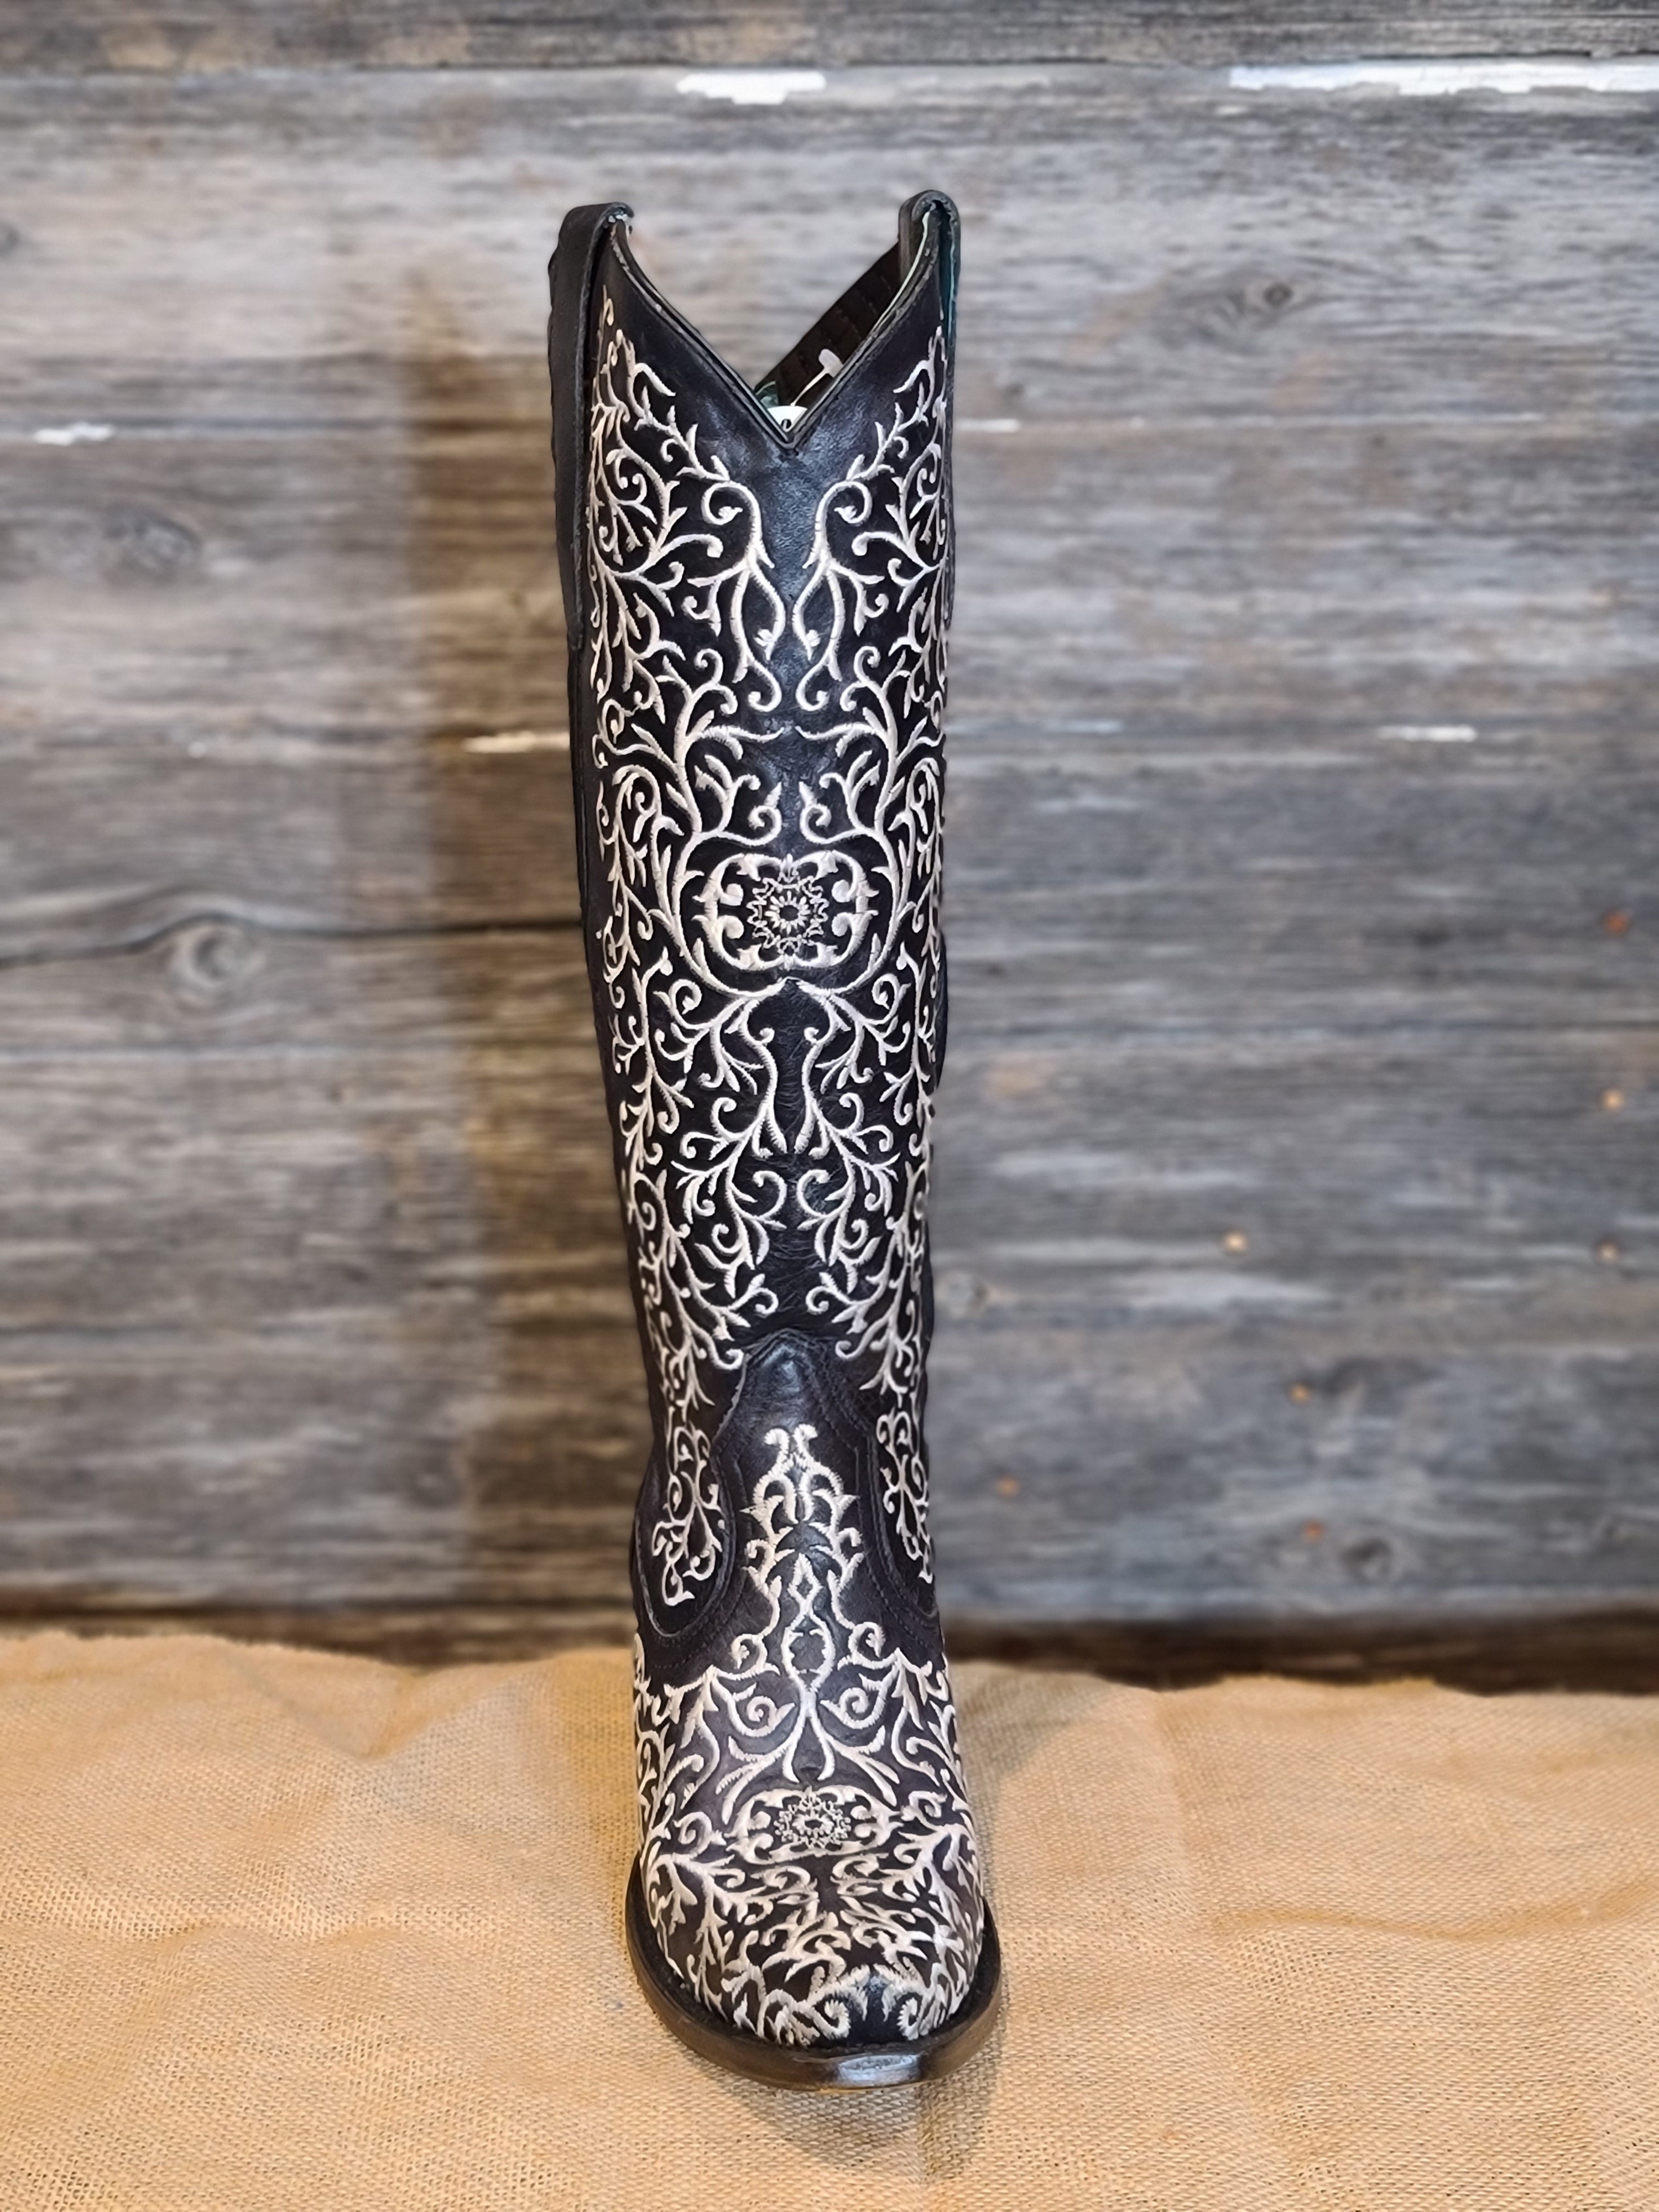 Corral Black Embroidery & Zipper Tall Snip Toe Boot A4096